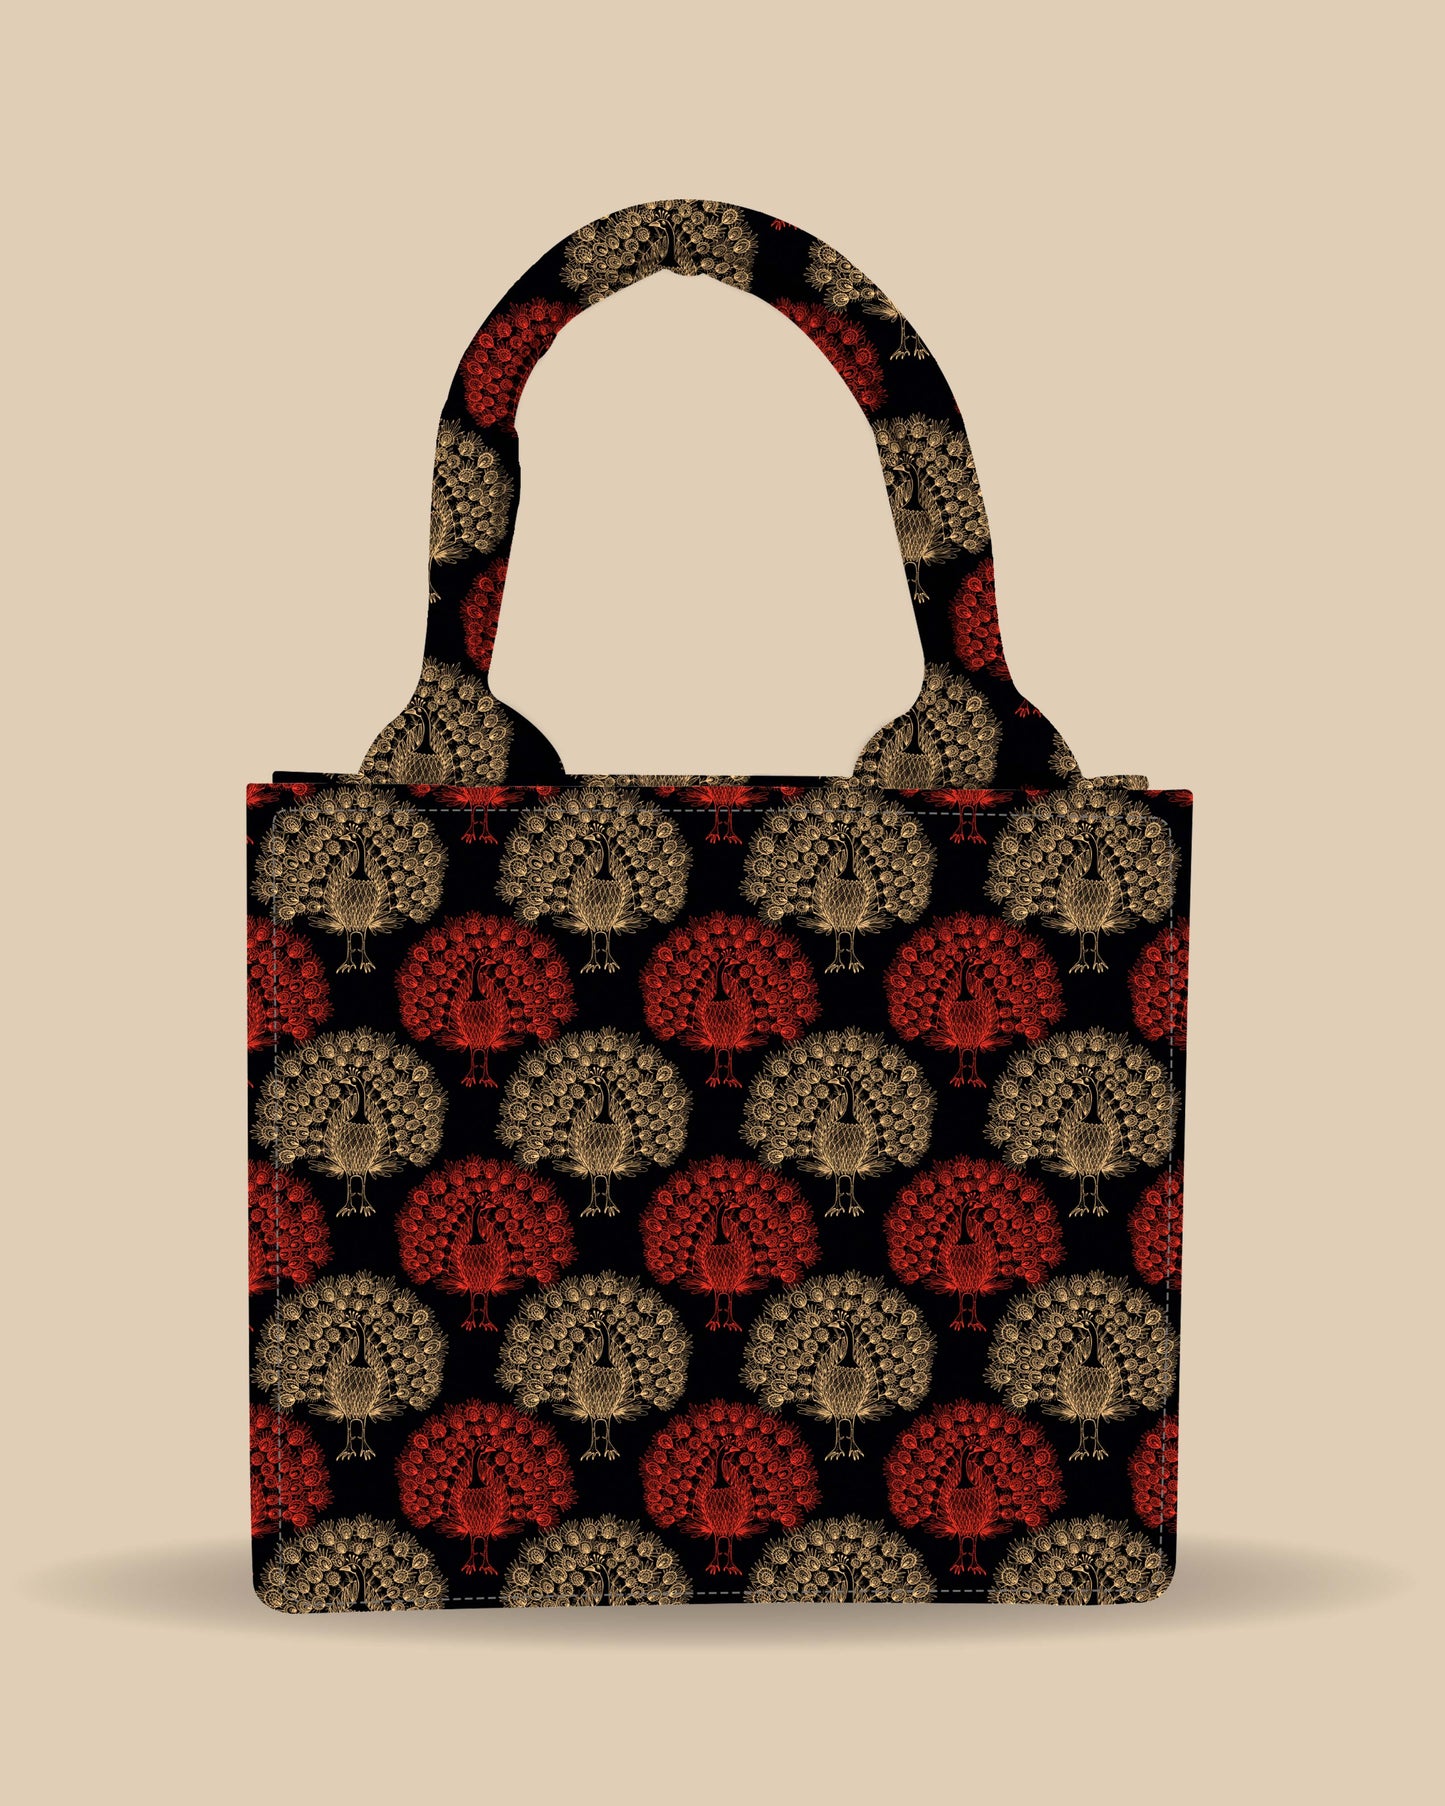 Customized Small Tote Bag Designed With Elegant Peacocks